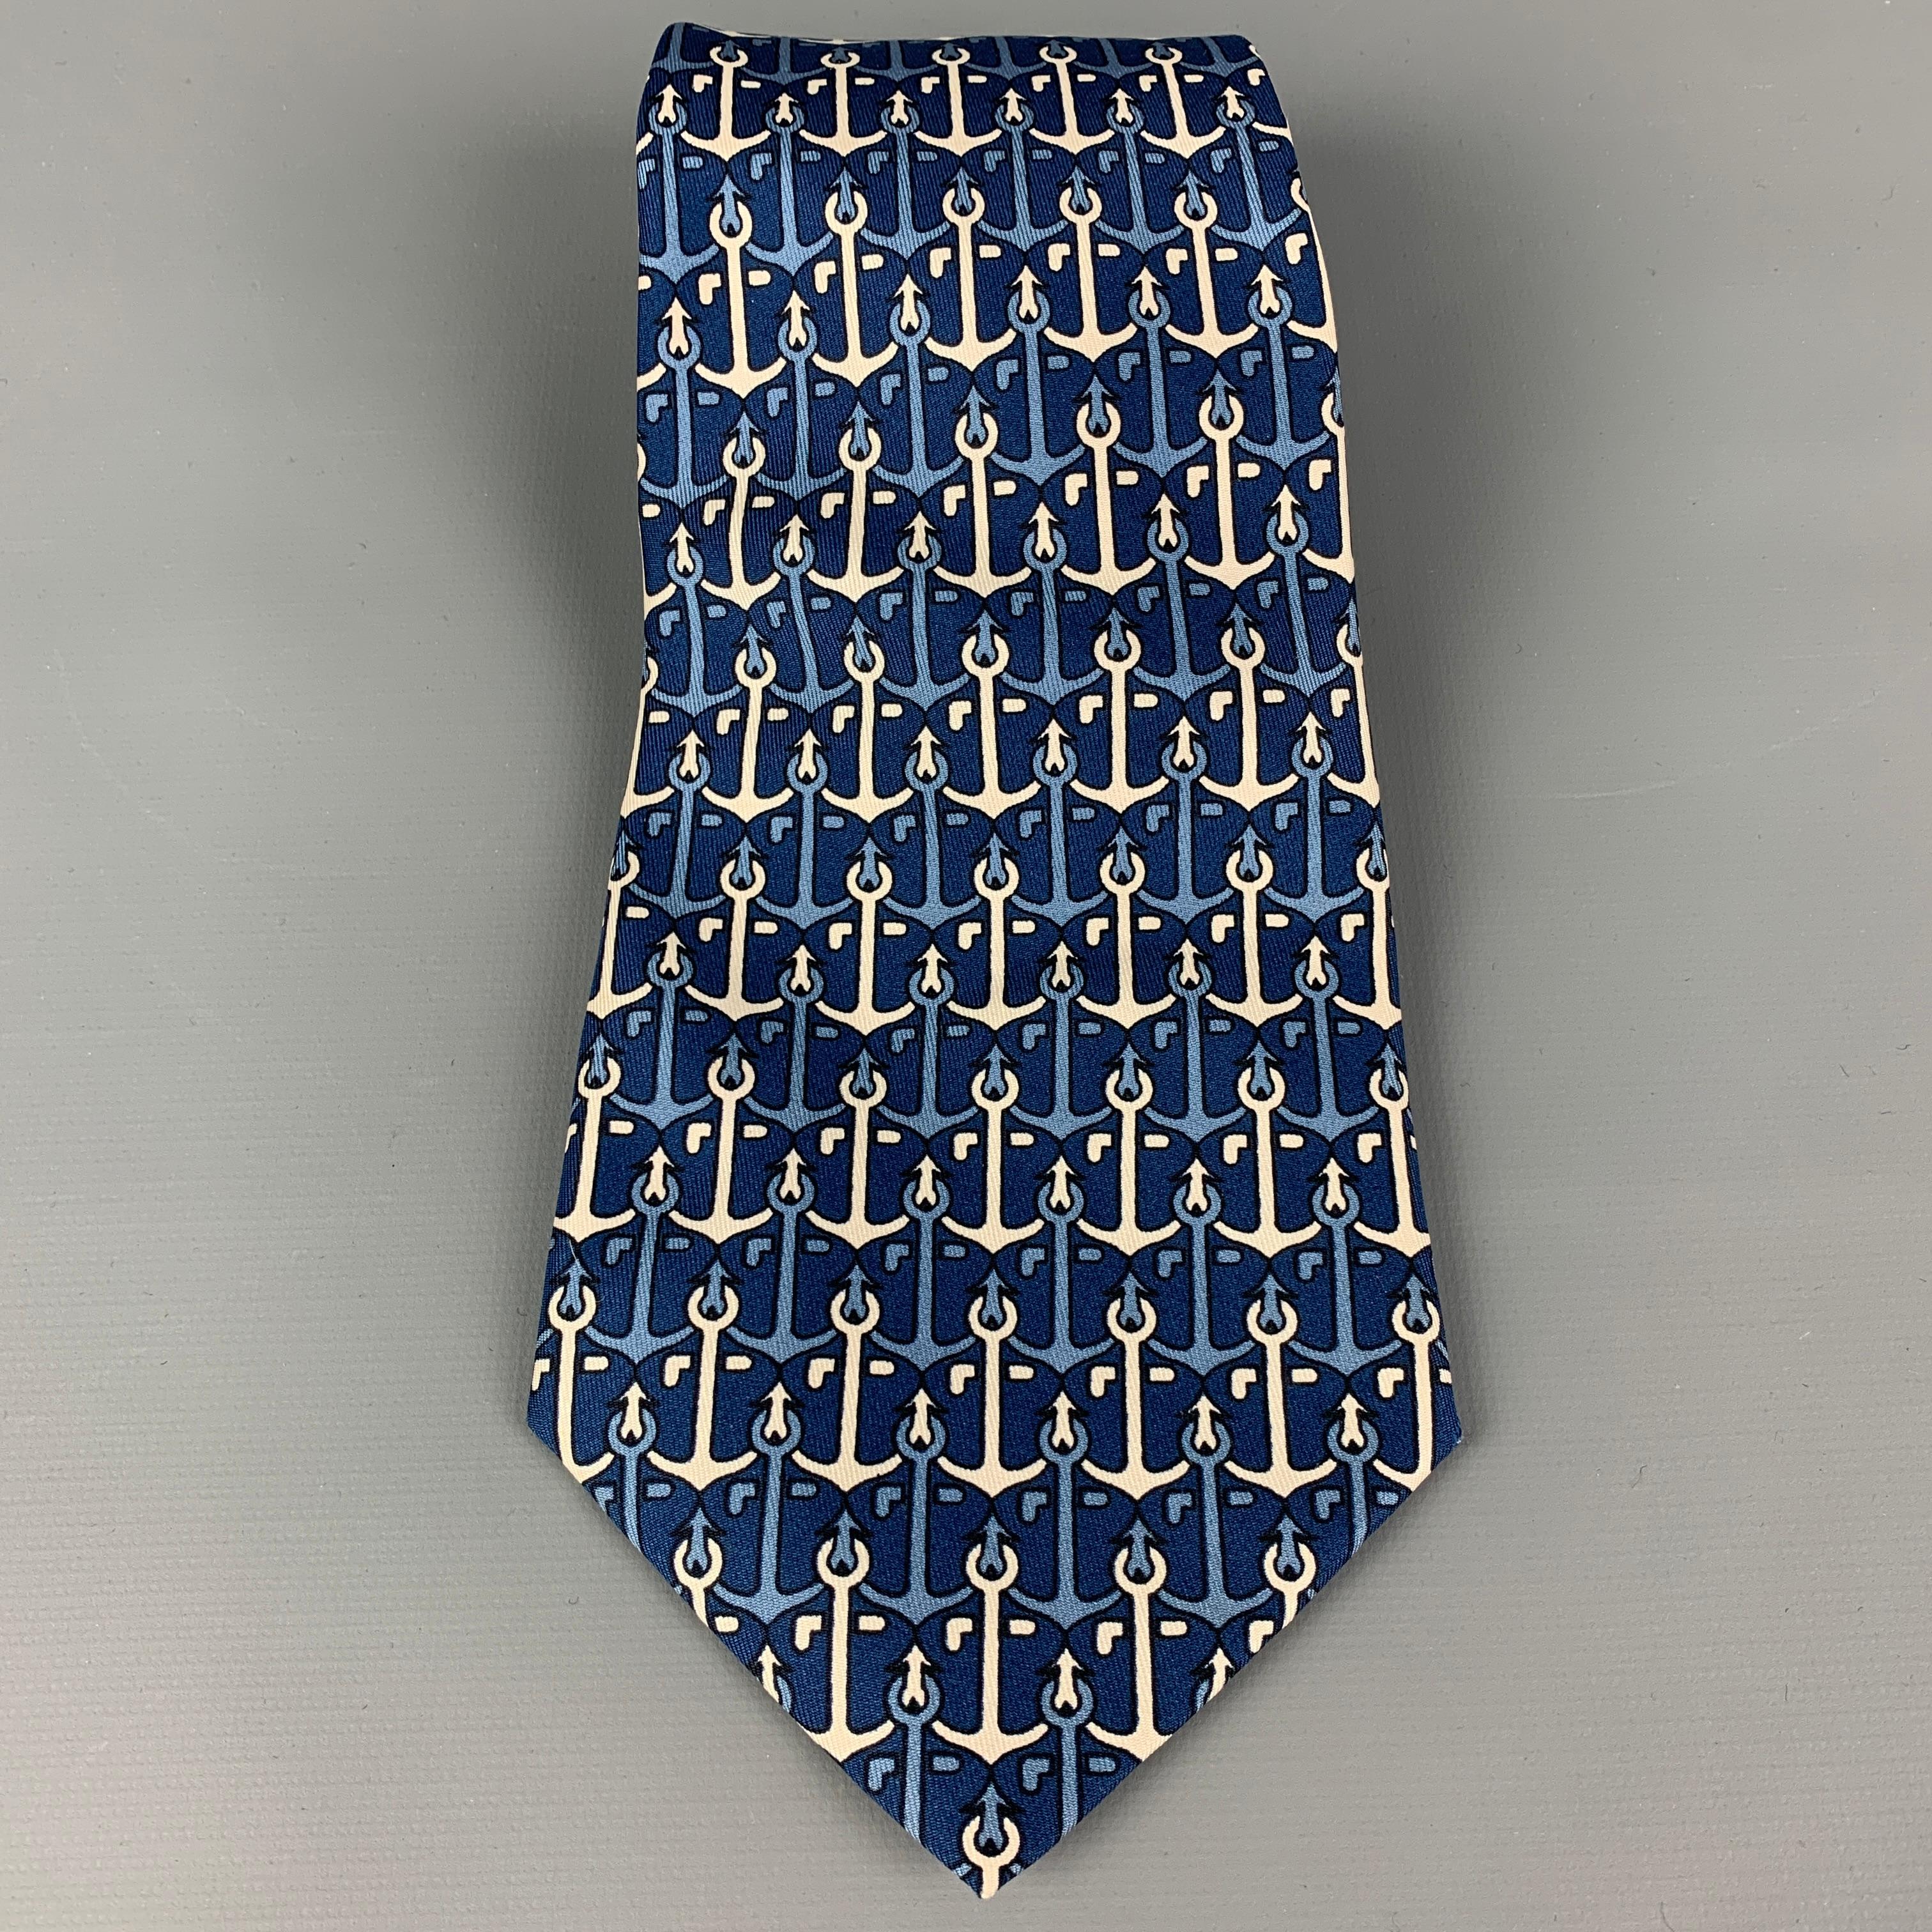 HERMES necktie comes in a blue & white anchor print silk. Made in France. 

Very Good Pre-Owned Condition.

Measurements:
Marked: 547 1A

Width: 4.5 in. 